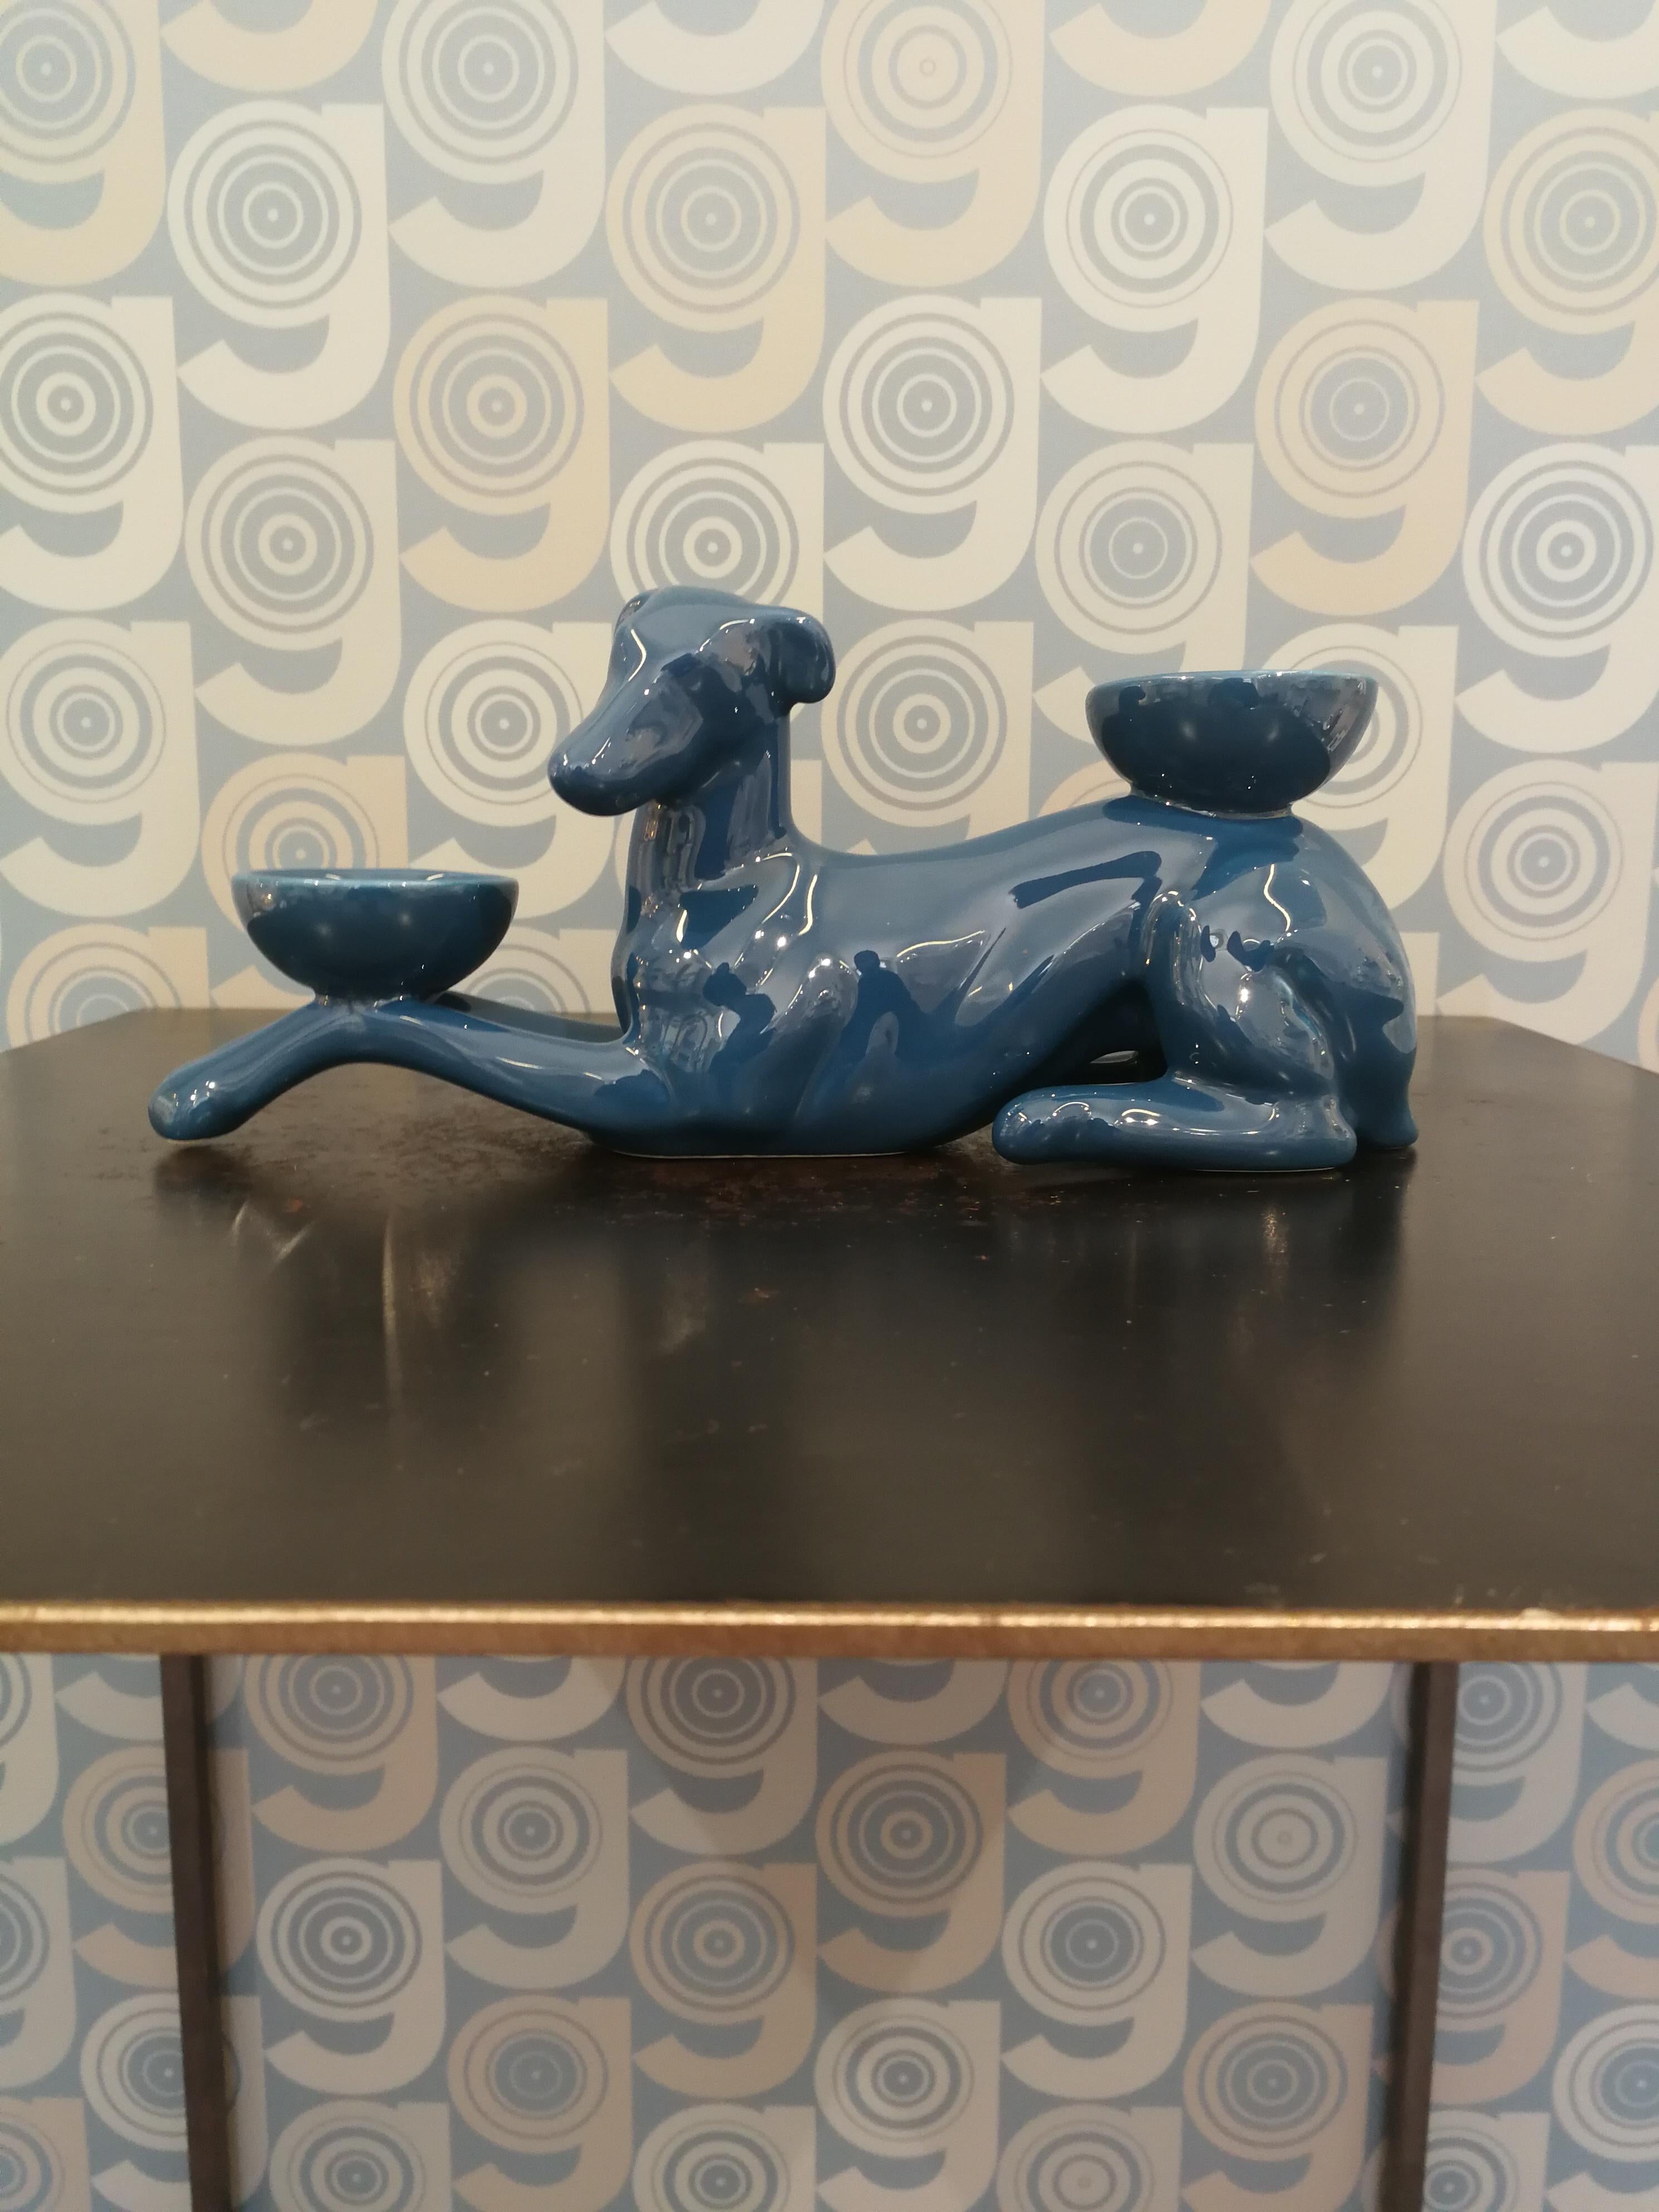 This greyhound is part of an original collection of candle holder animals. The realization of the shape takes place through a mold with liquid clay; tiled and hand painted in a vast range of colours, from the most delicate pastels to the more